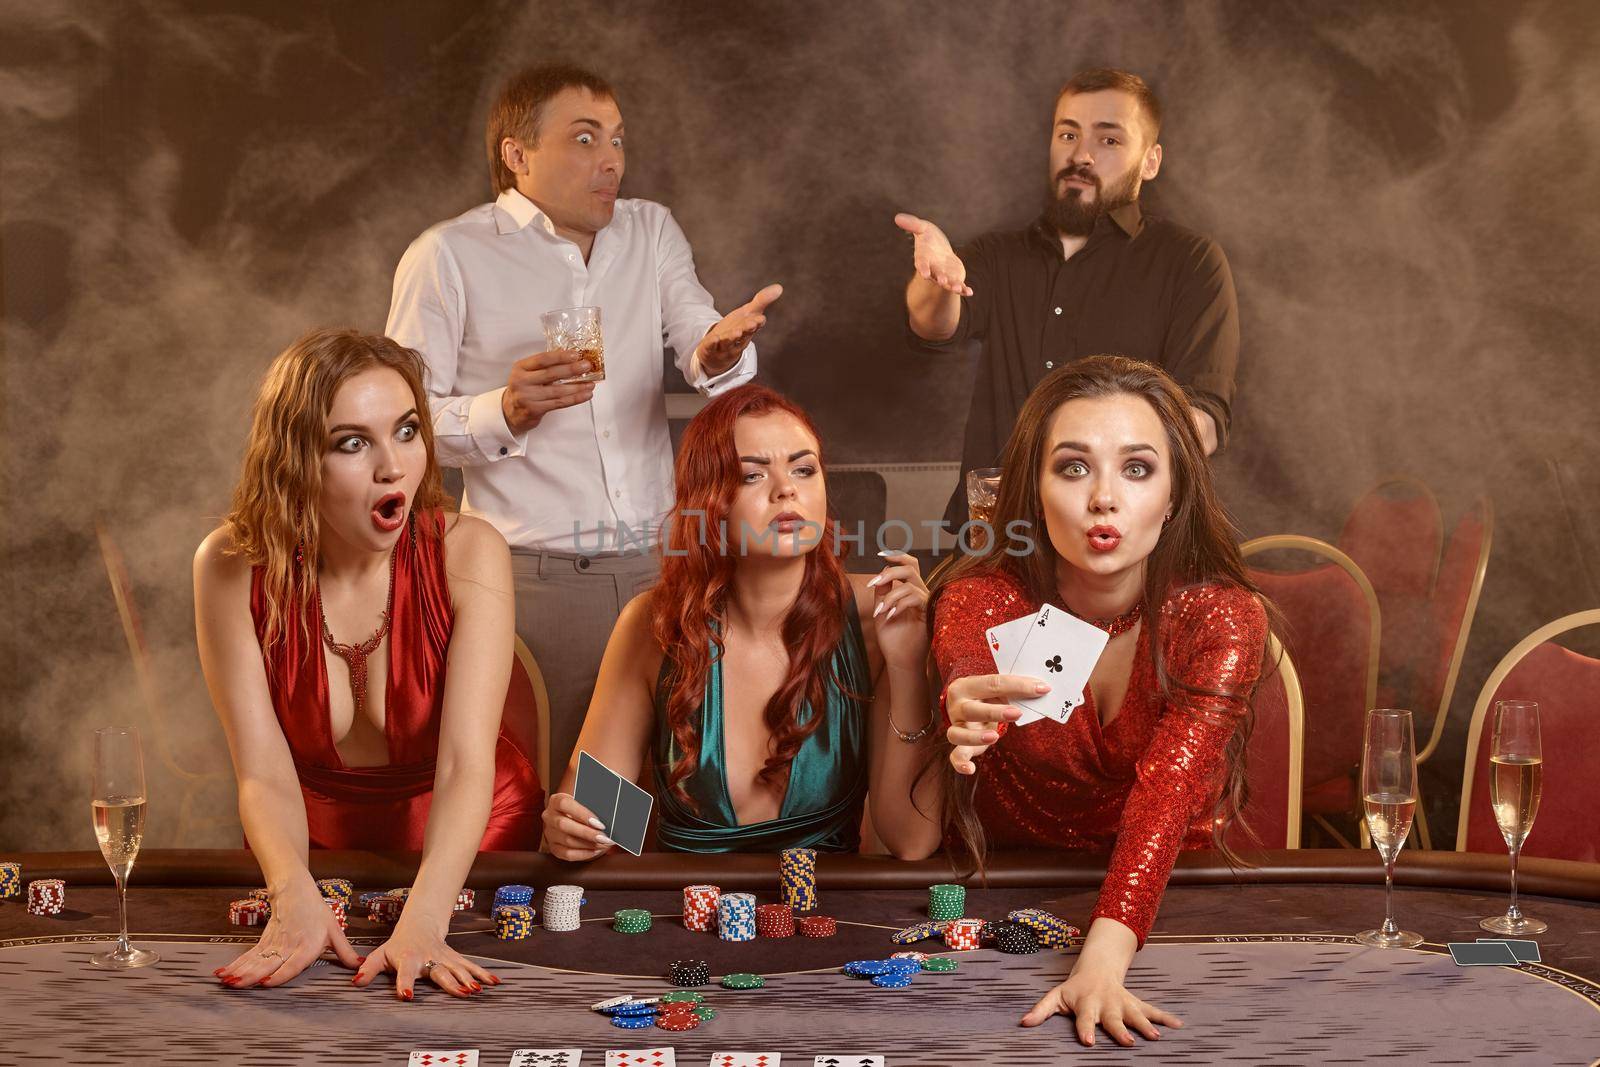 Agitated classmates are playing poker at casino. They are celebrating their win, smiling and posing at the table against a dark smoke background. Cards, chips, money, alcohol, fortune, gambling, entertainment concept.